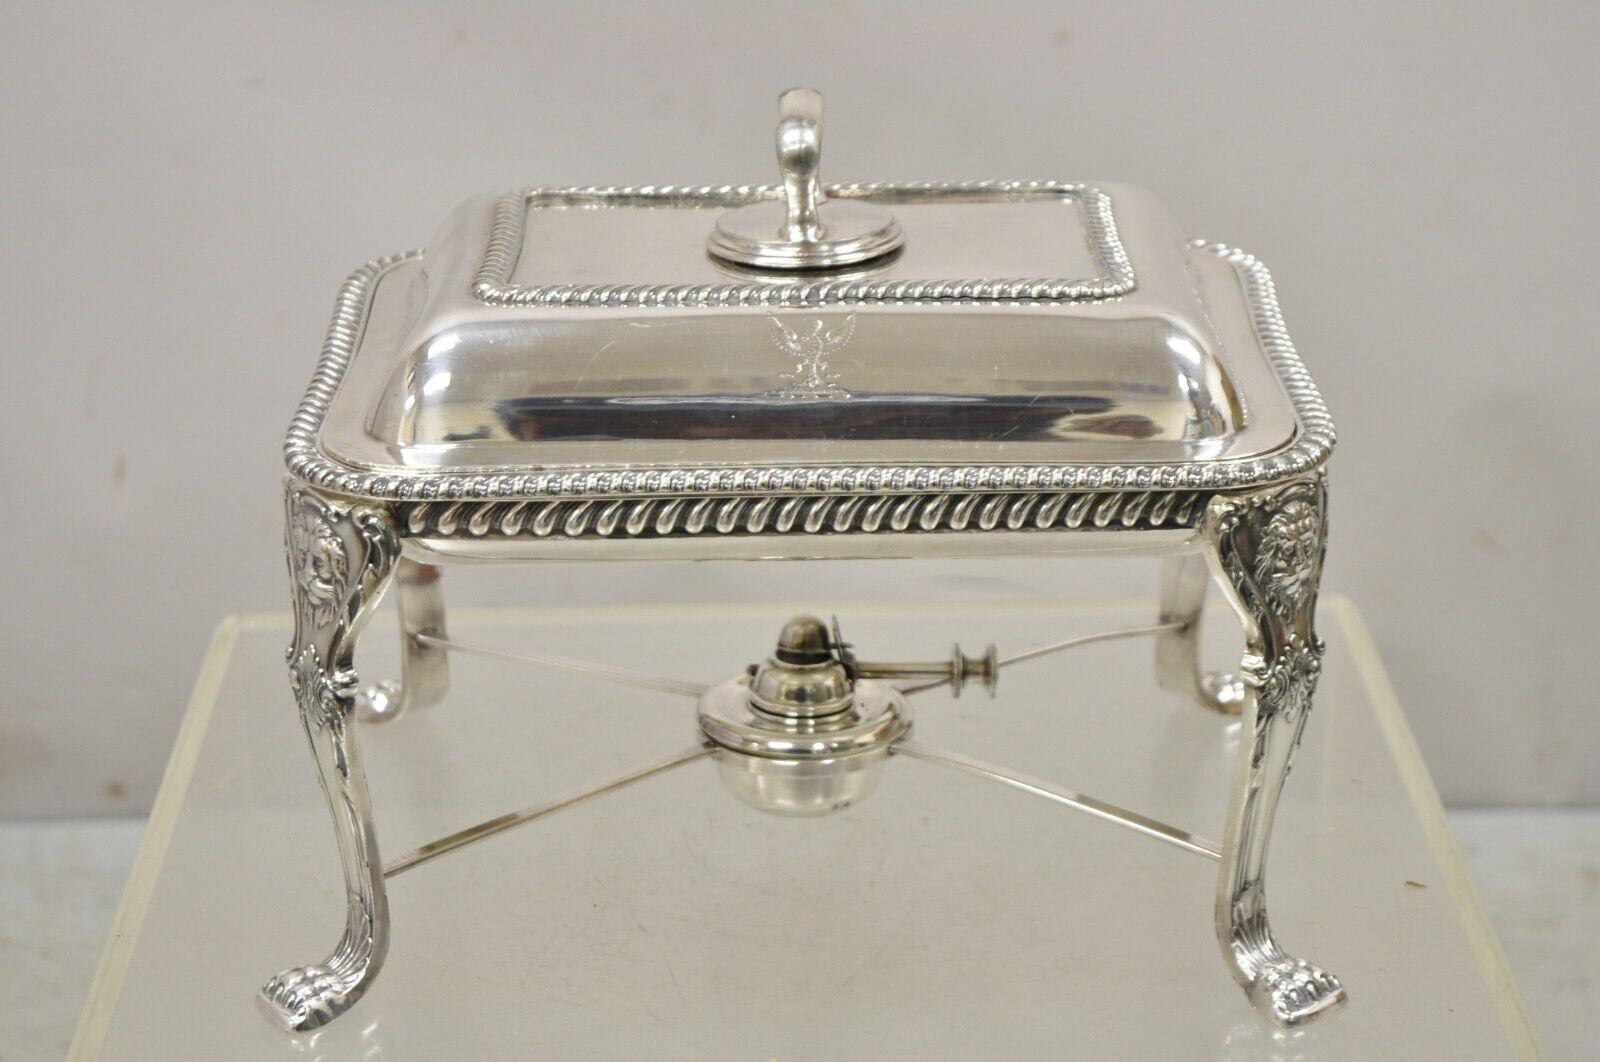 Antique Walker & Hall Silver Plated Chafing Serving Dish Warmer with Lions. Item features a  lion and paw feet, removable dish, original hallmark, very nice antique item, great style and form. Circa Early to Mid 20th Century. Measurements: 10